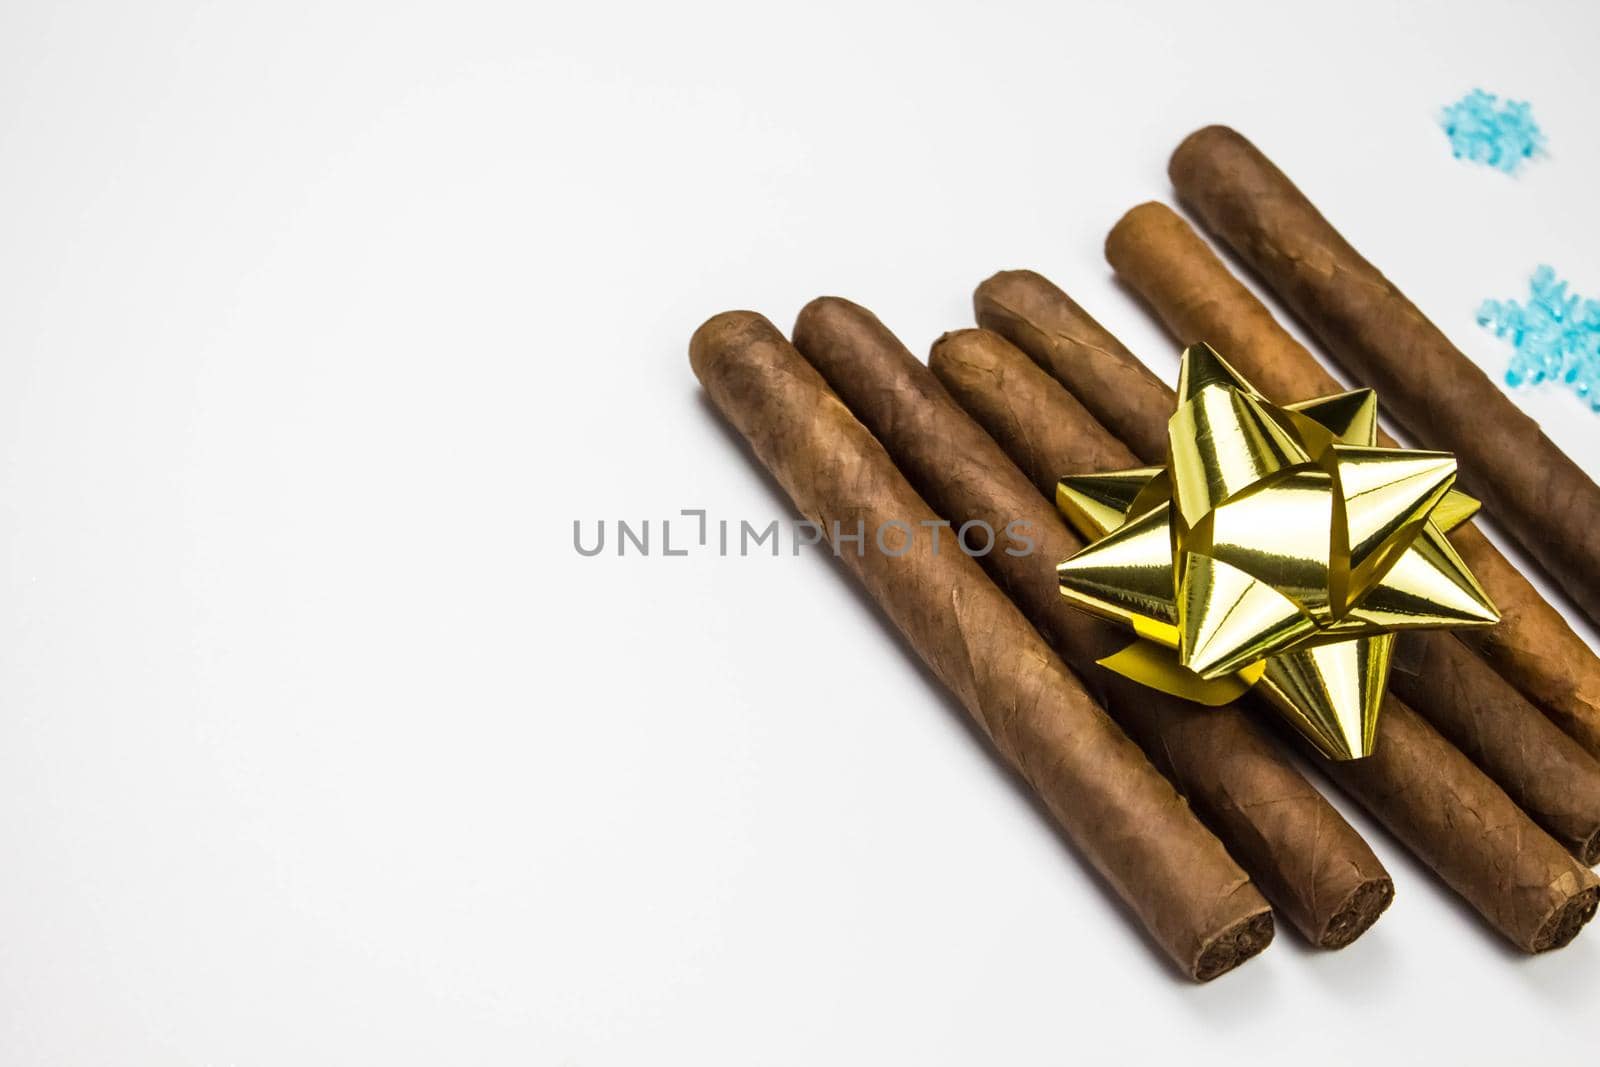 Cigars as a gift on white background. Cigars with gold bow. by JuliaDorian